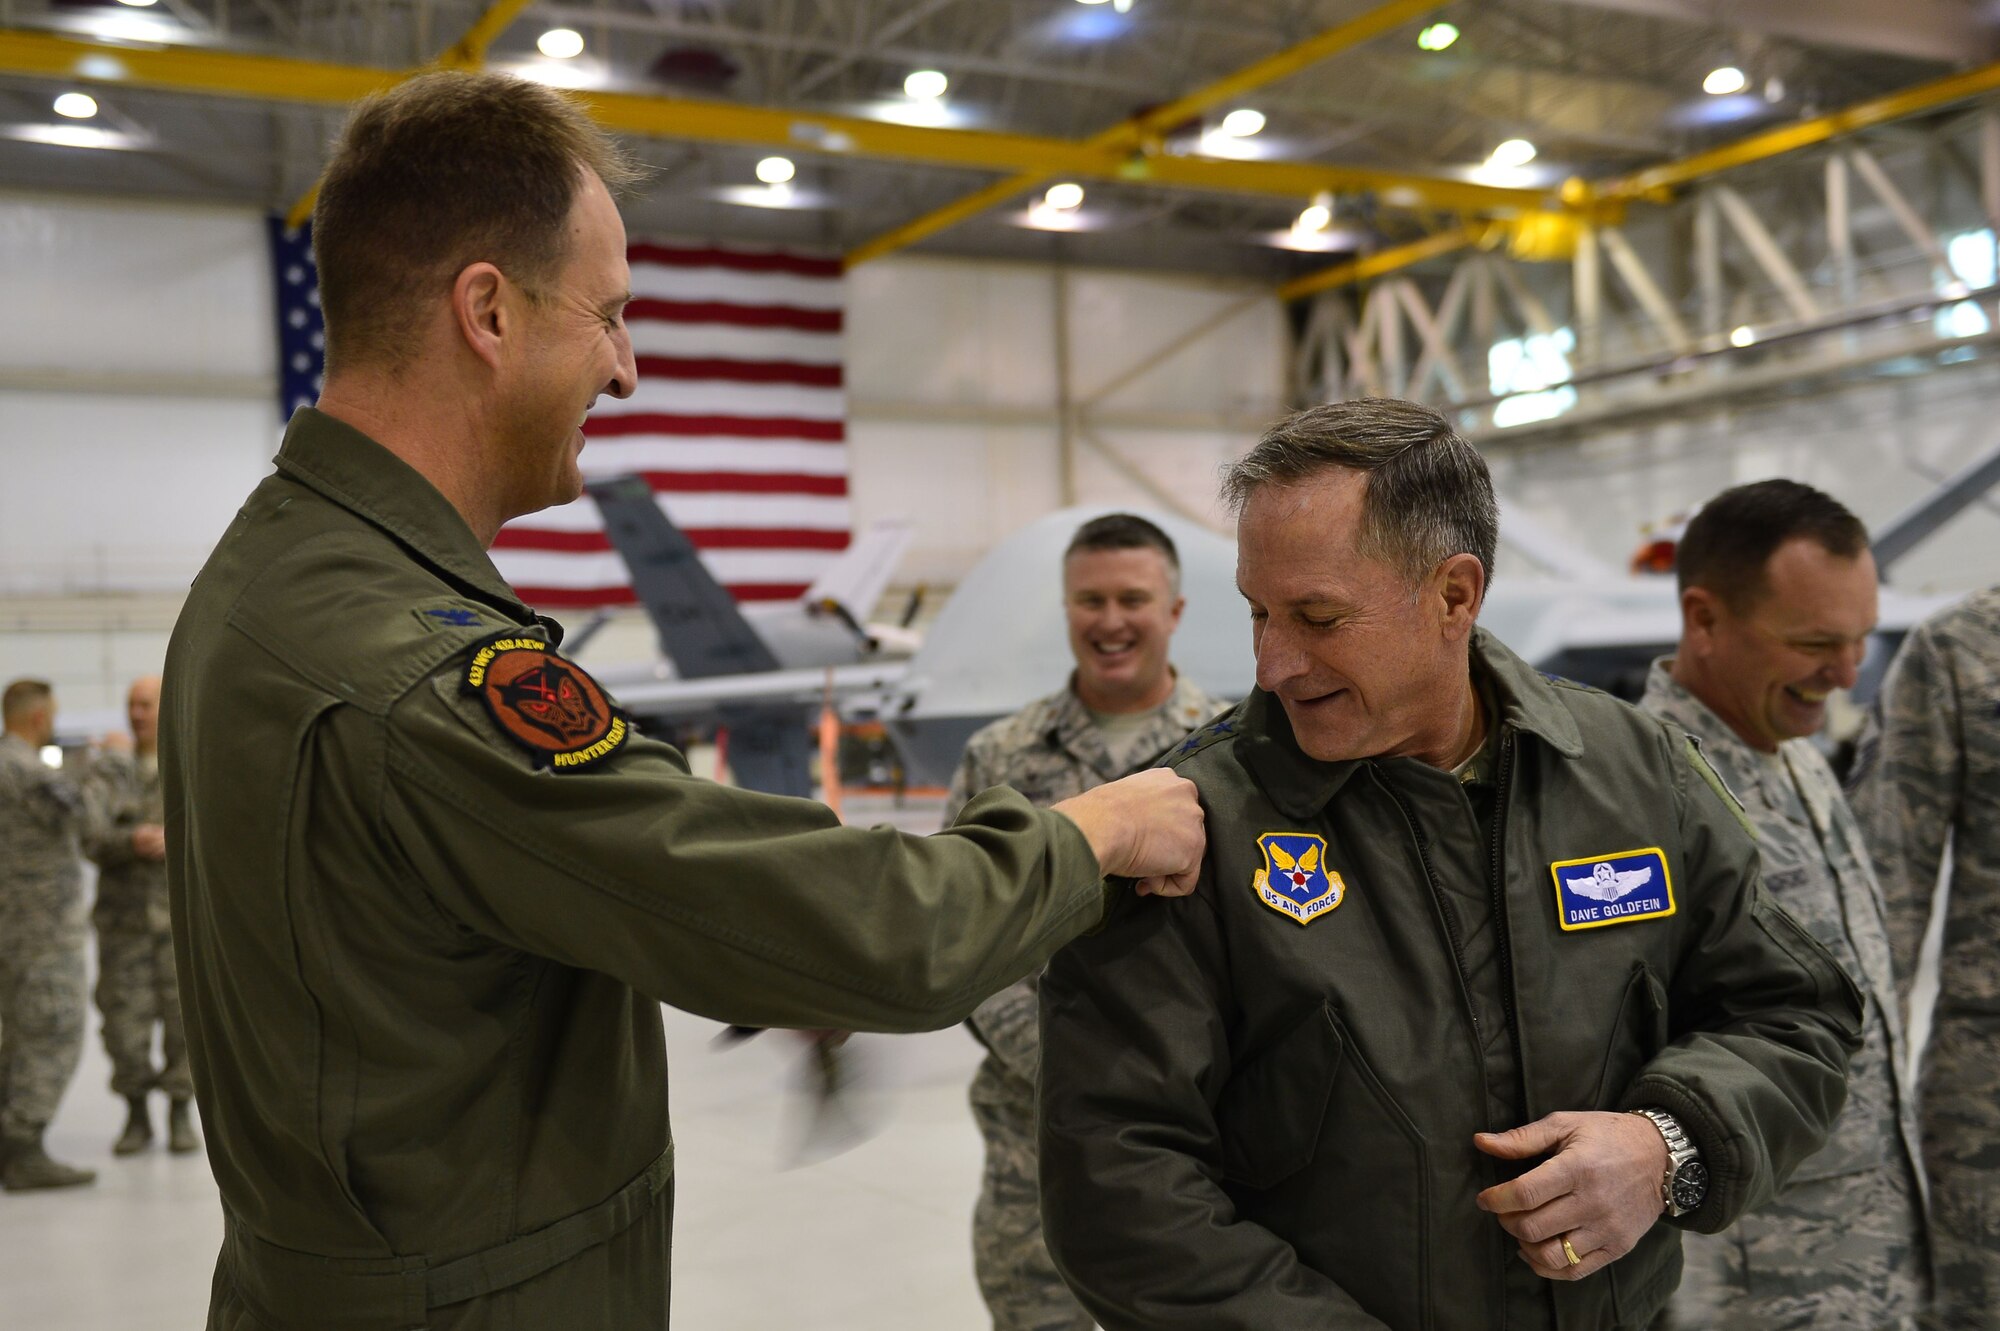 Col. Cheater, 432nd Wing/432nd Air Expeditionary Wing commander, puts the 432nd WG patch on Air Force Chief of Staff Gen. David L. Goldfein Jan. 9, 2017, at Creech Air Force Base, Nev. Goldfein toured operational squadrons around the base to meet with 432nd Wing/432nd Air Expeditionary Wing and 799th Air Base Group Airmen. (U.S. Air Force photo/Airman 1st Class Haley Stevens)